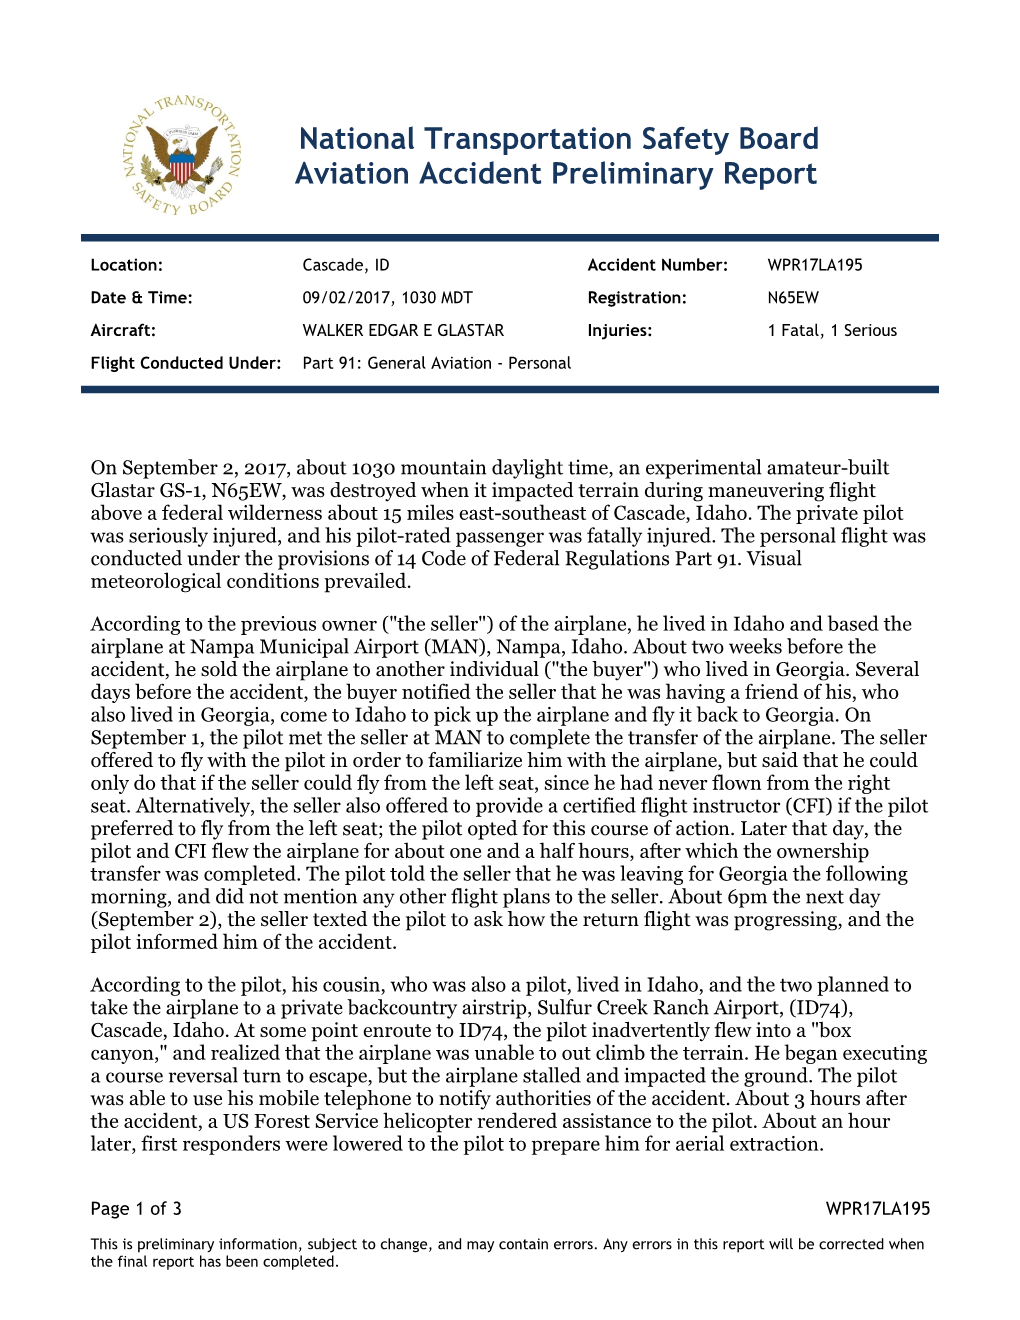 National Transportation Safety Board Aviation Accident Preliminary Report